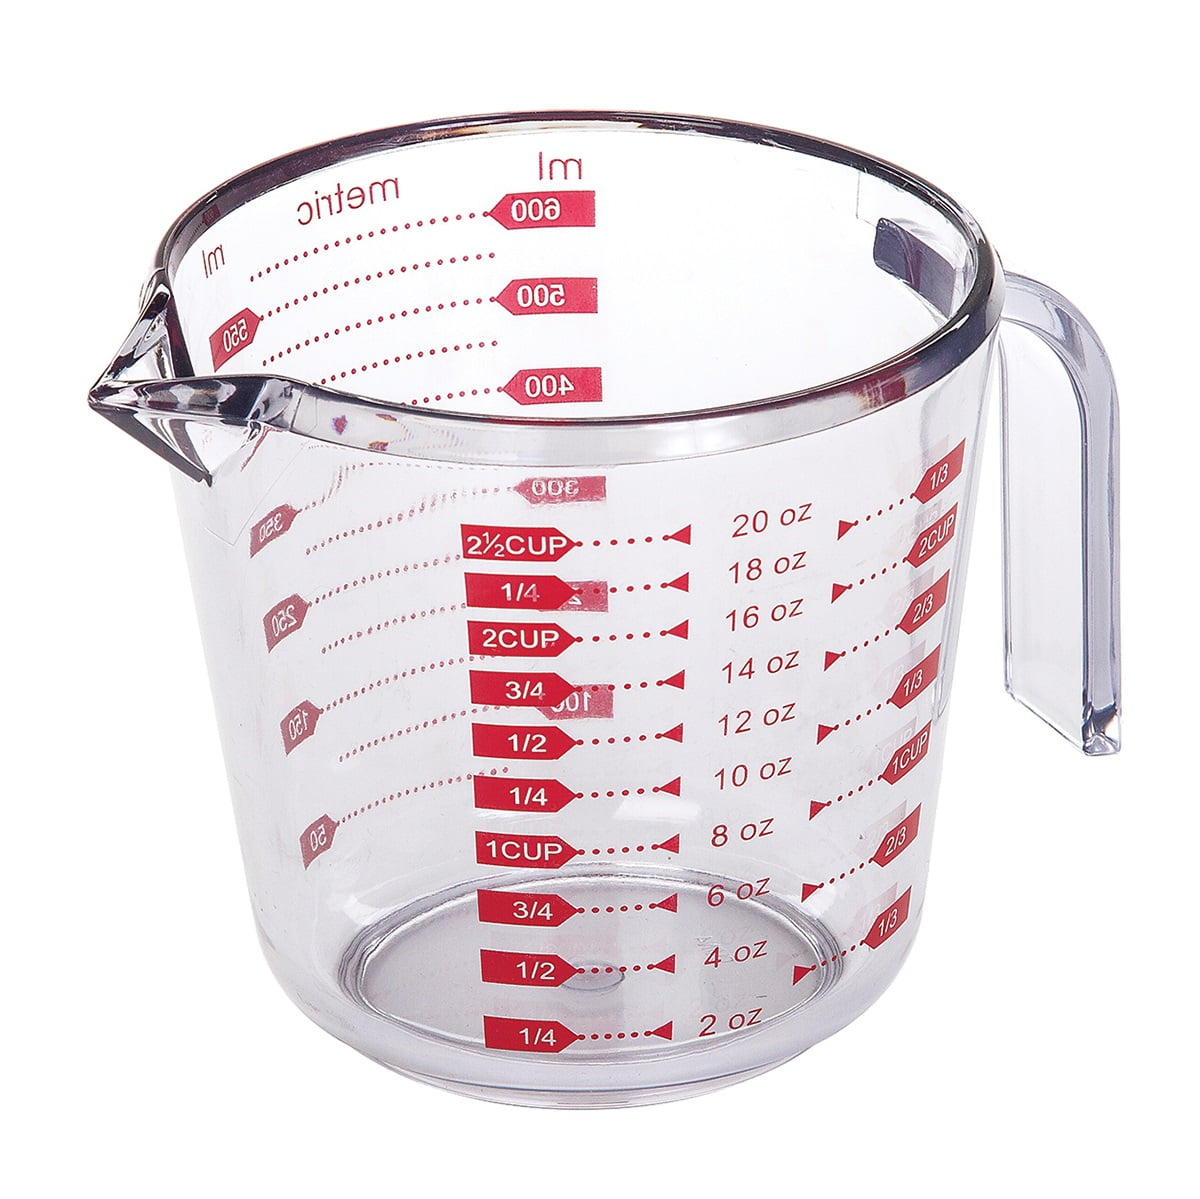 2 Lb Depot 1/2 Cup Measuring Cup, Stainless Steel, Accurate Markings US &  Metric, 1/2 cup - Pick 'n Save